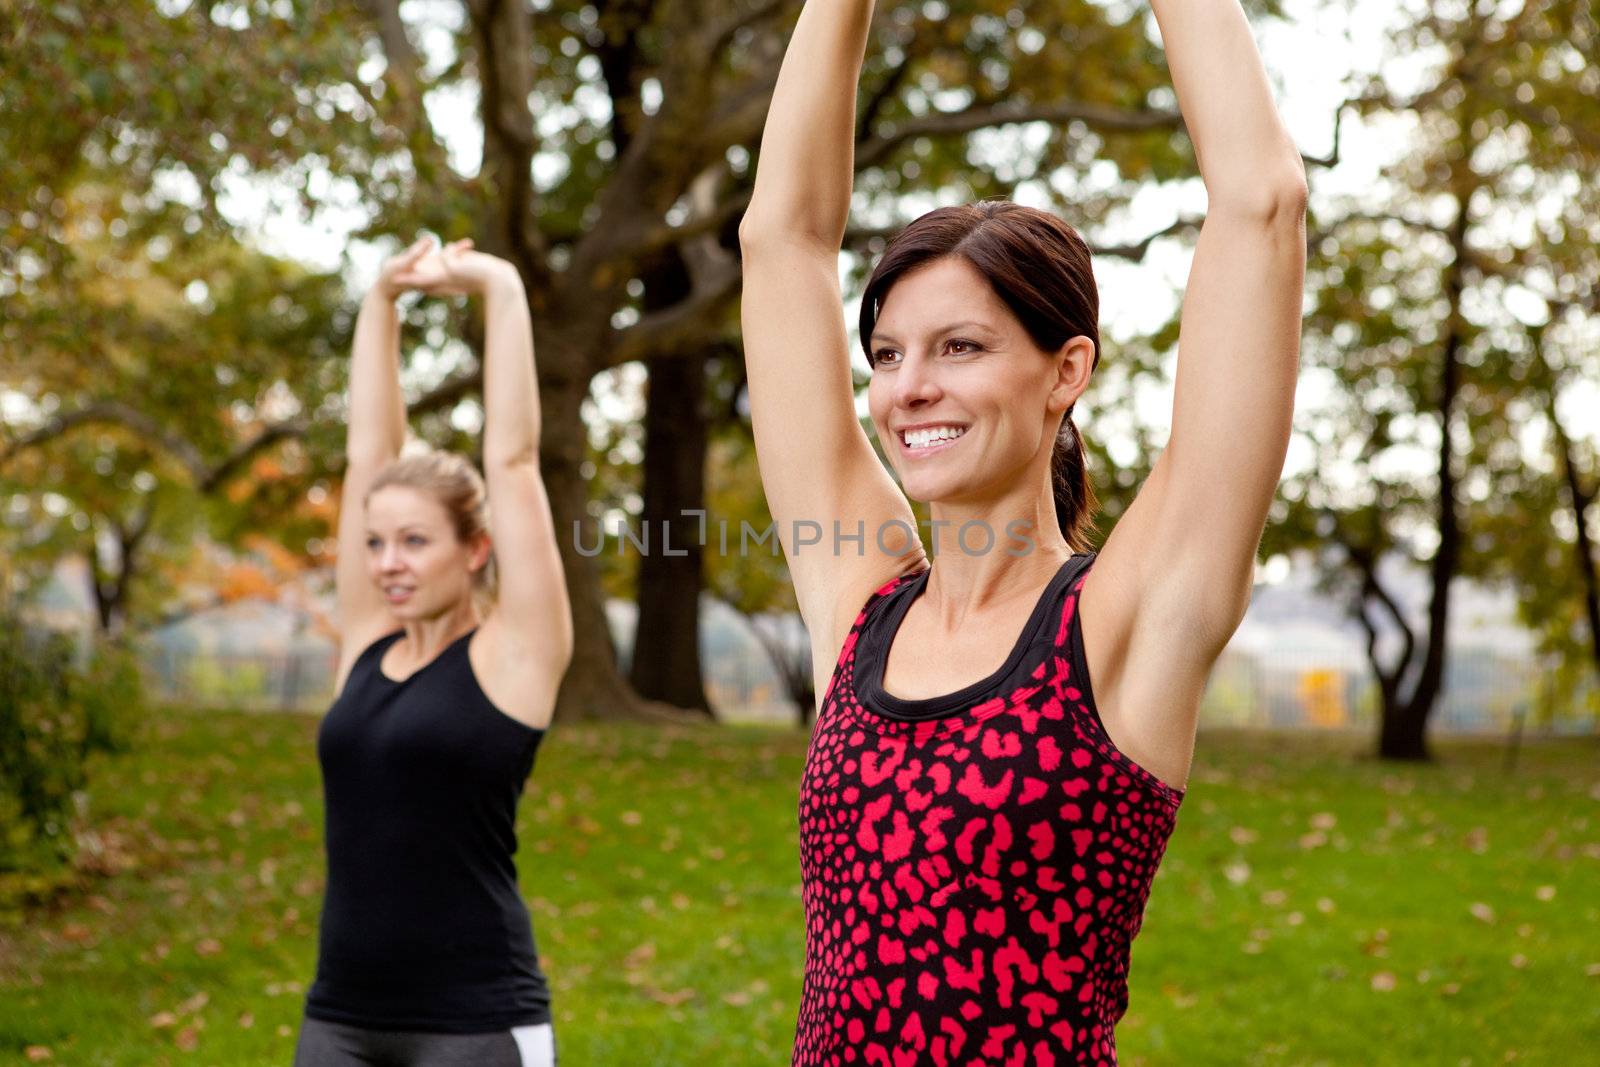 Two women stretching in a park - outdoor exercise